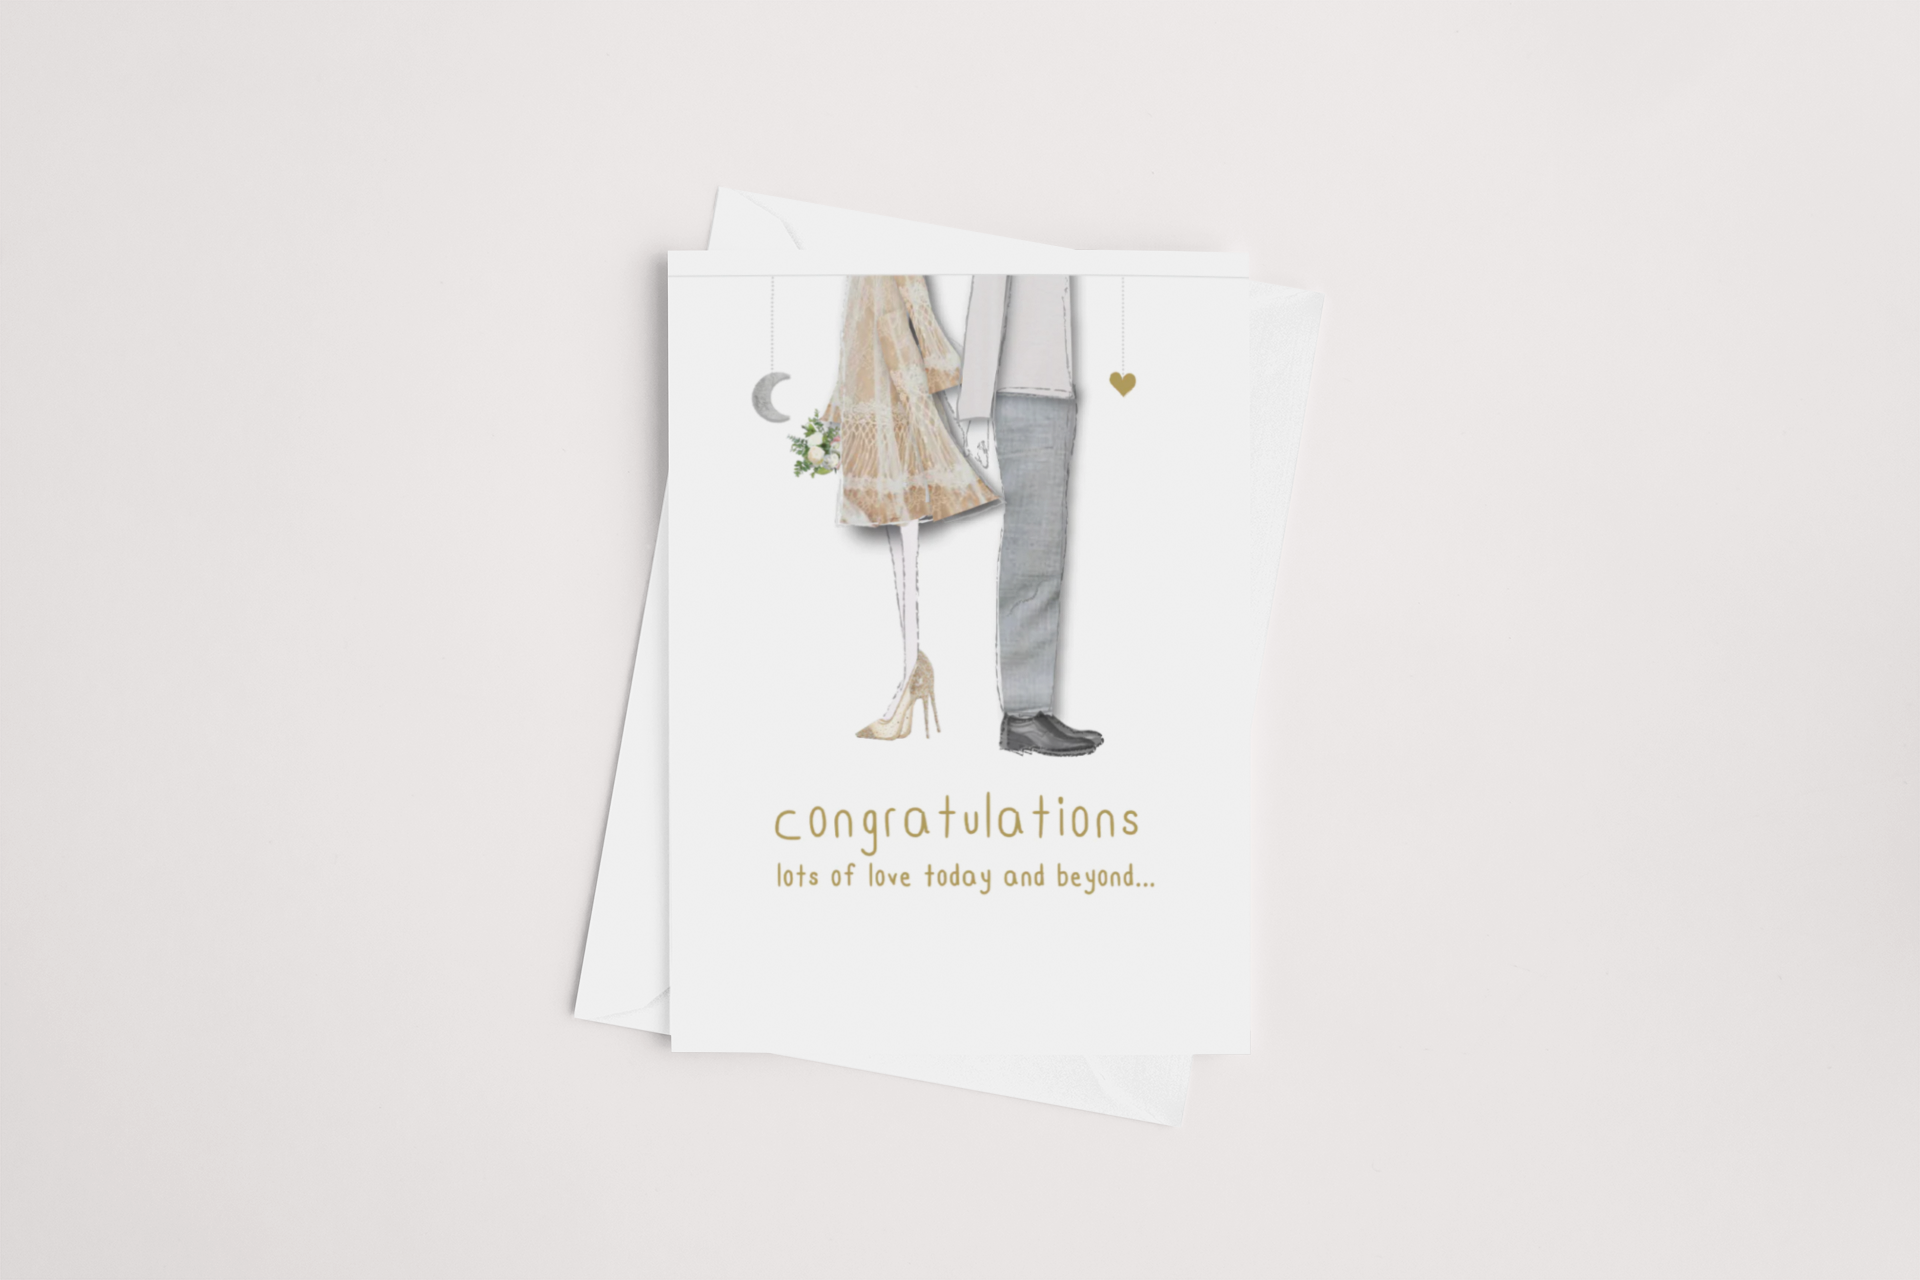 A greeting card, Lots of Love today and beyond Card by icandy, featuring an illustration of a couple's lower bodies and feet in a celebration pose, with the phrase "congratulations lots of love today and beyond...